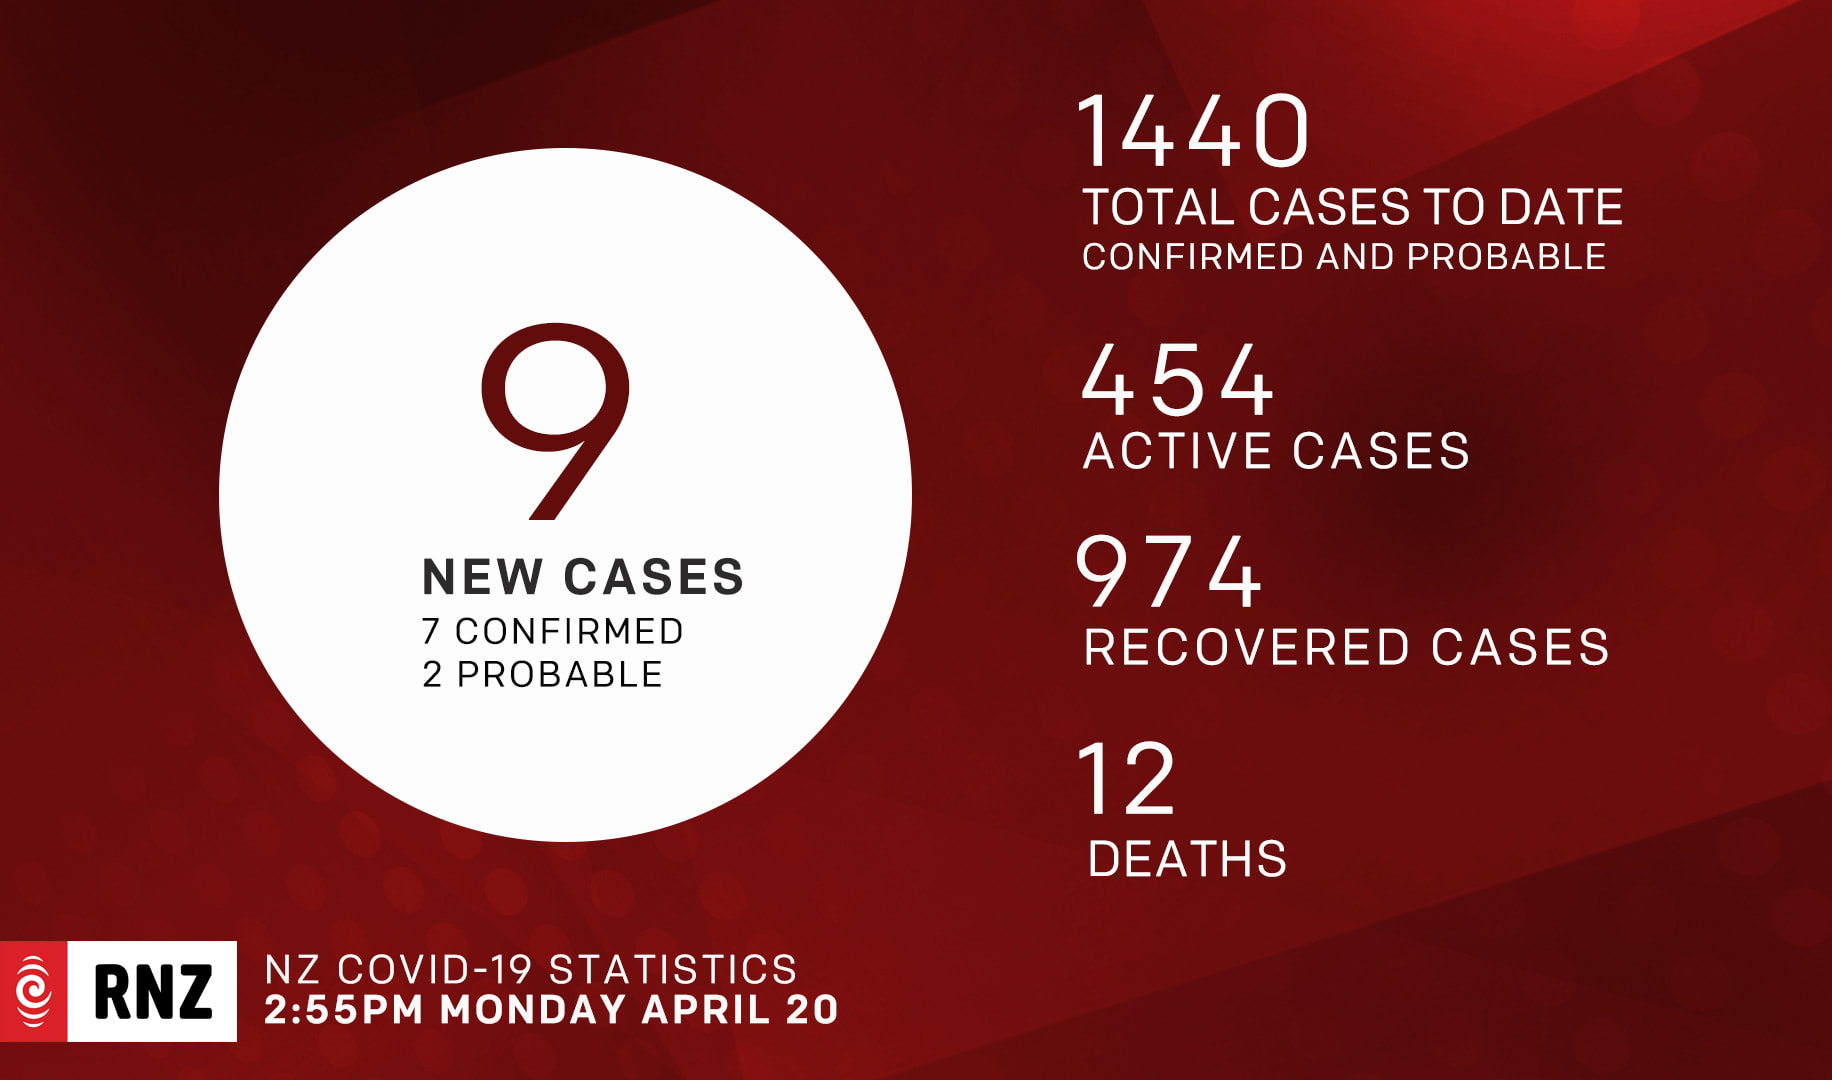 Covid-19 cases New Zealand NZ as on 20 April